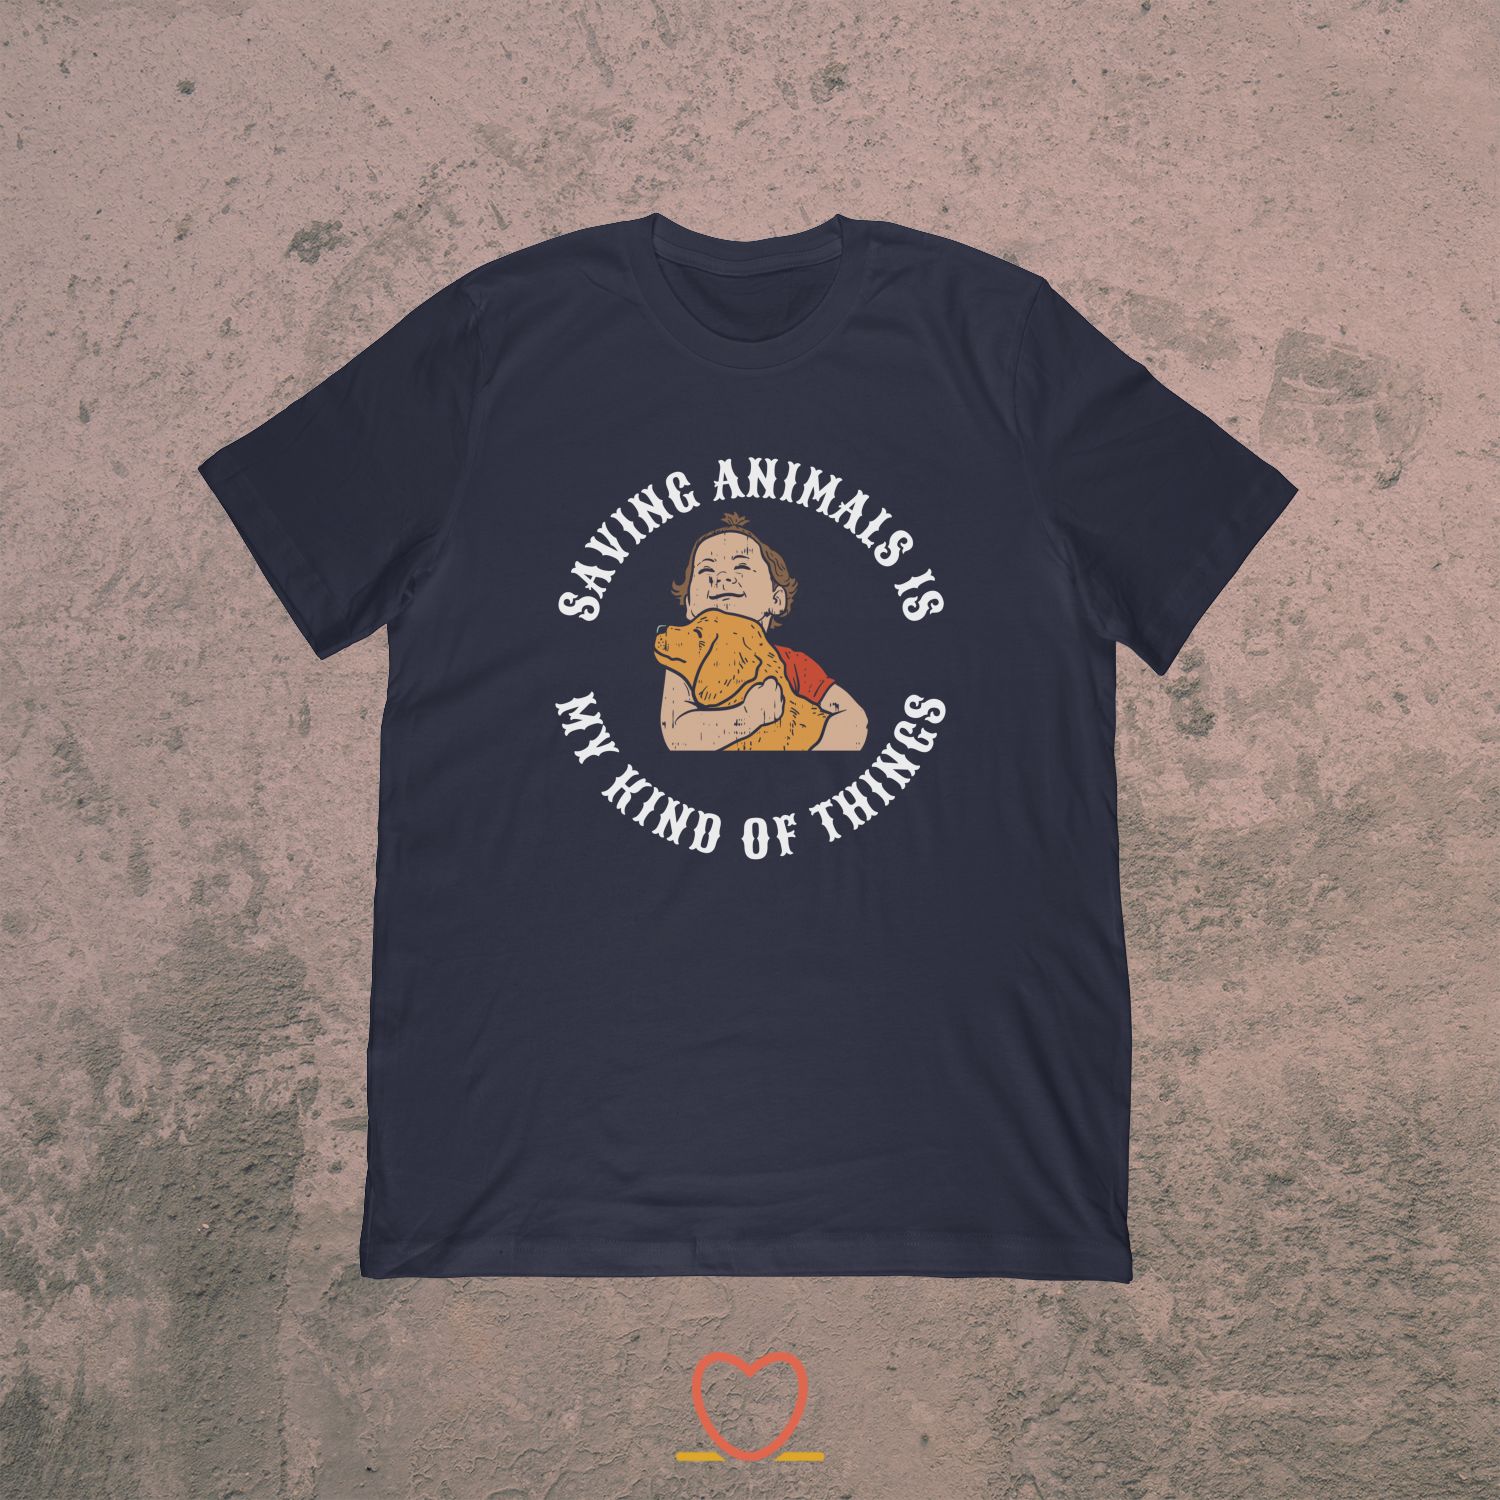 Saving Animals Is My Kind Of Things – Animal Rescue Tee